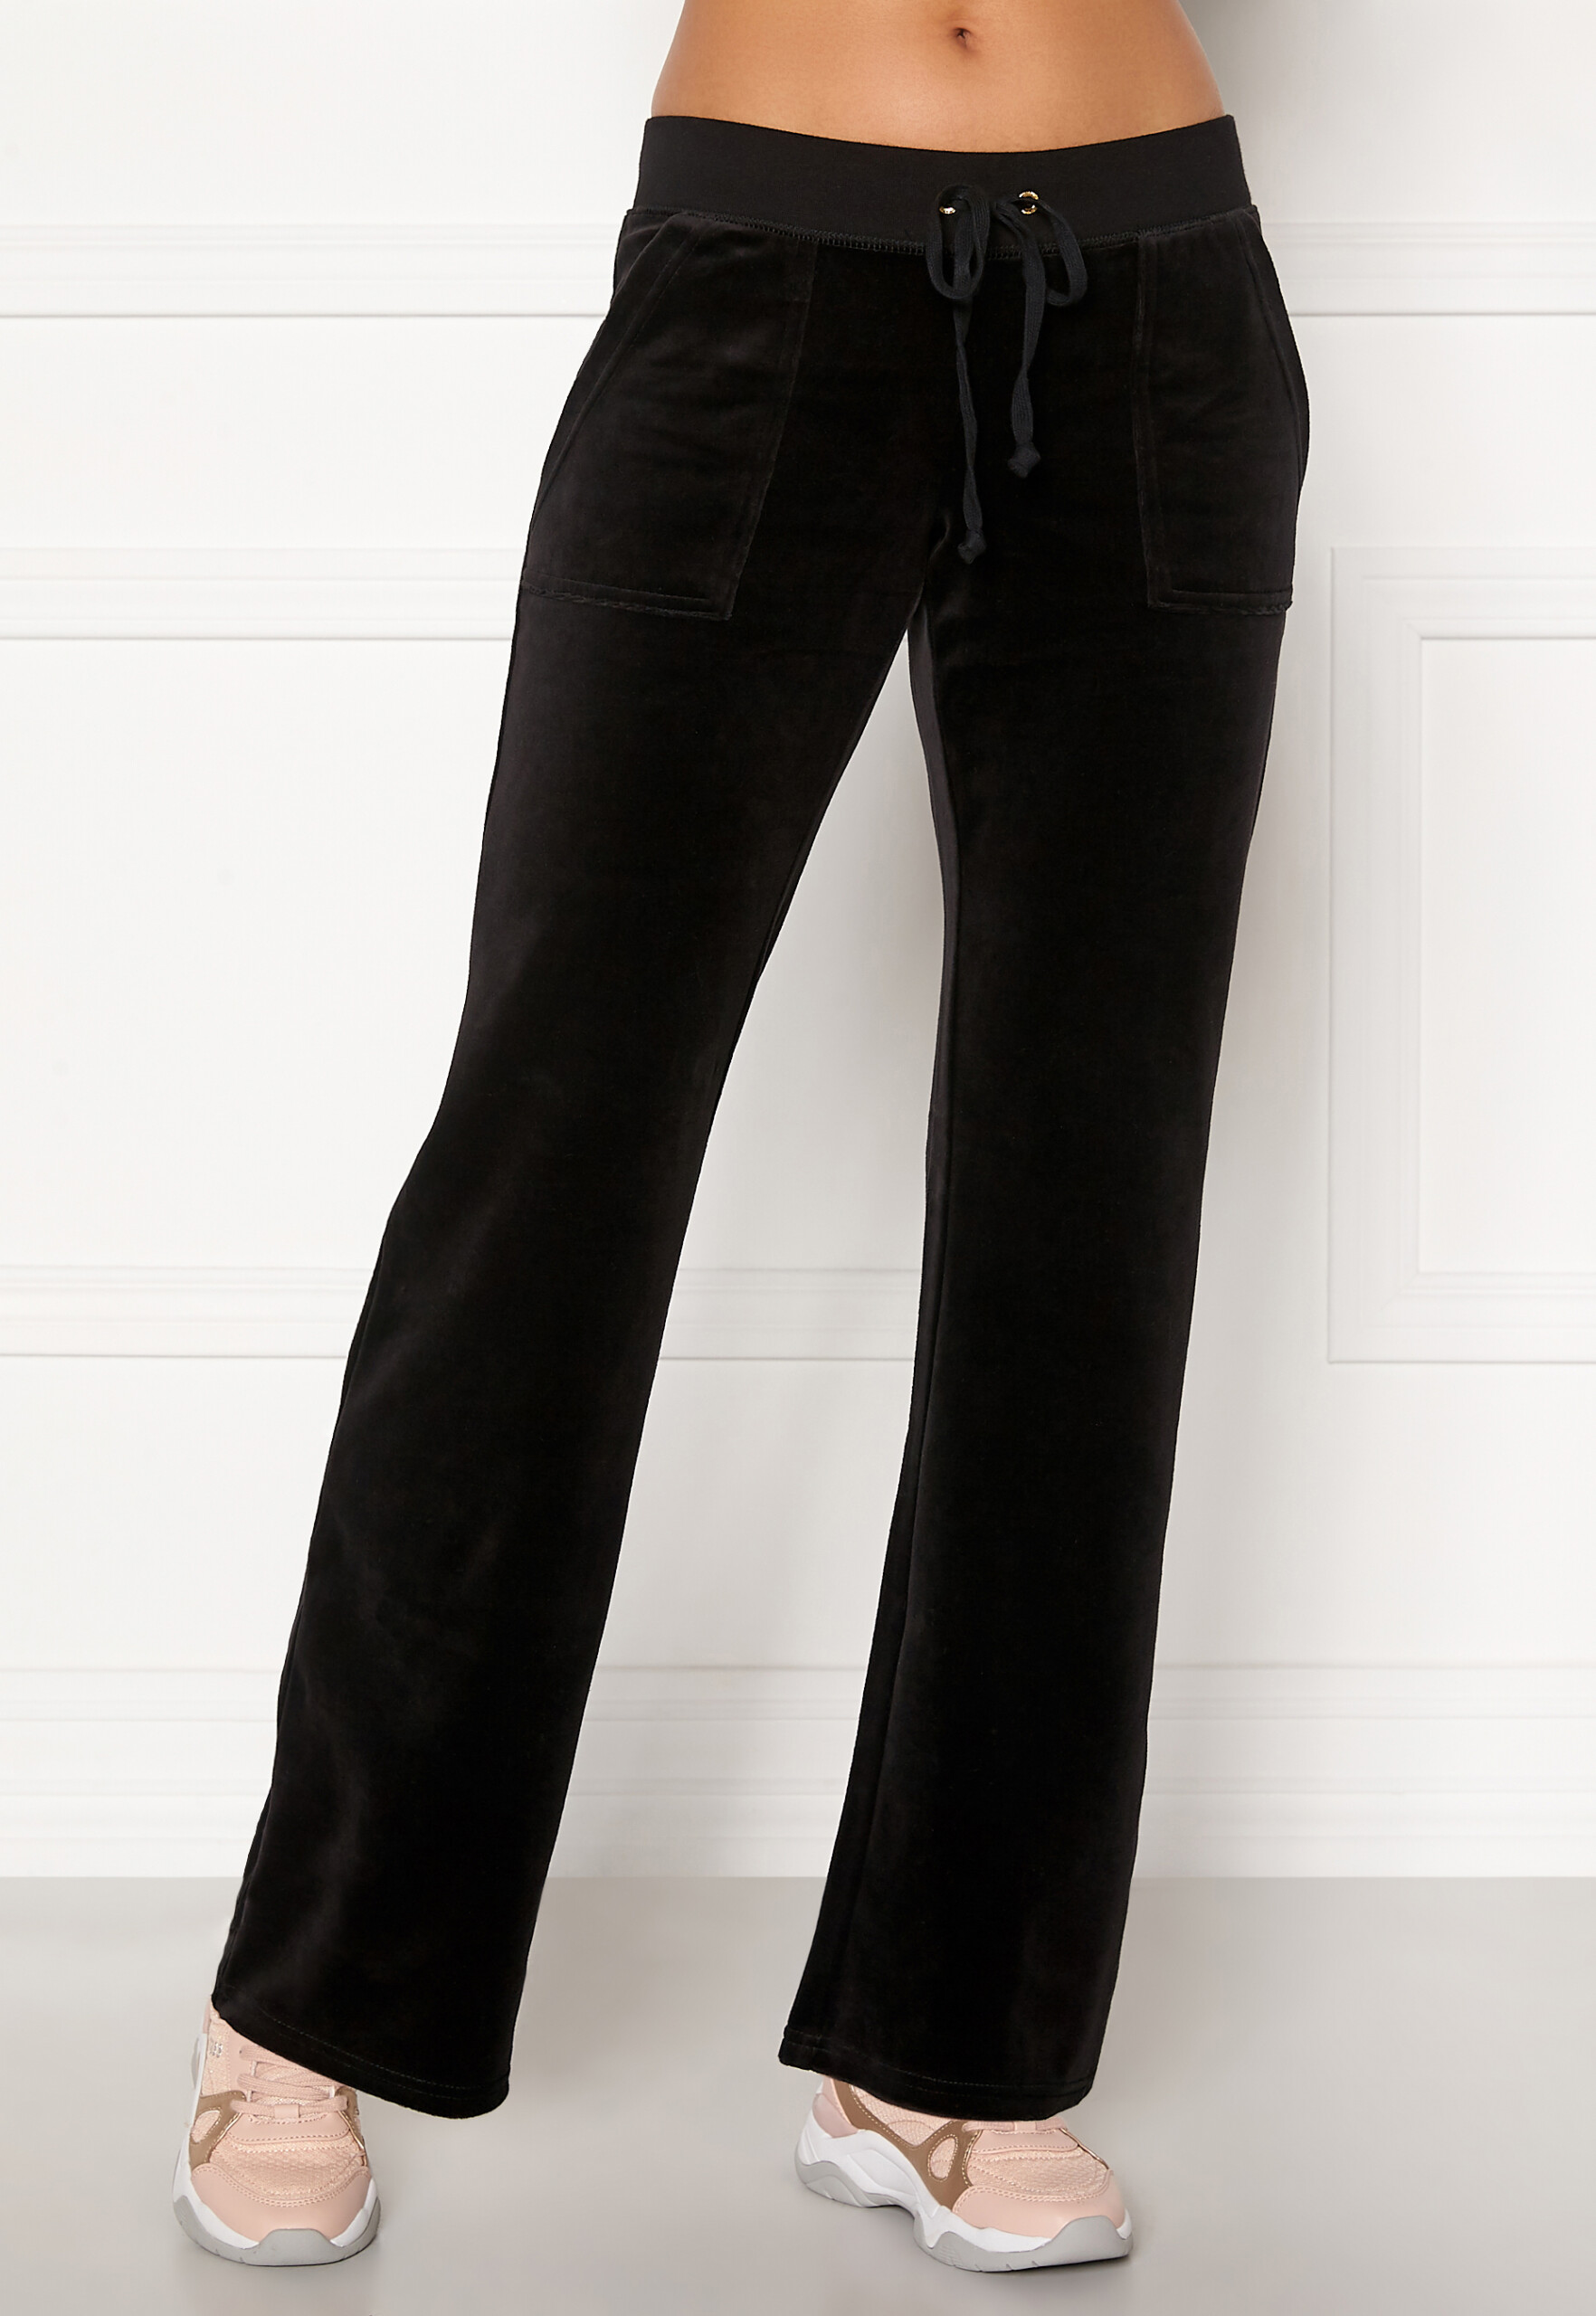 Juicy Couture Jean Pant Size Chart - Size-Chart.net